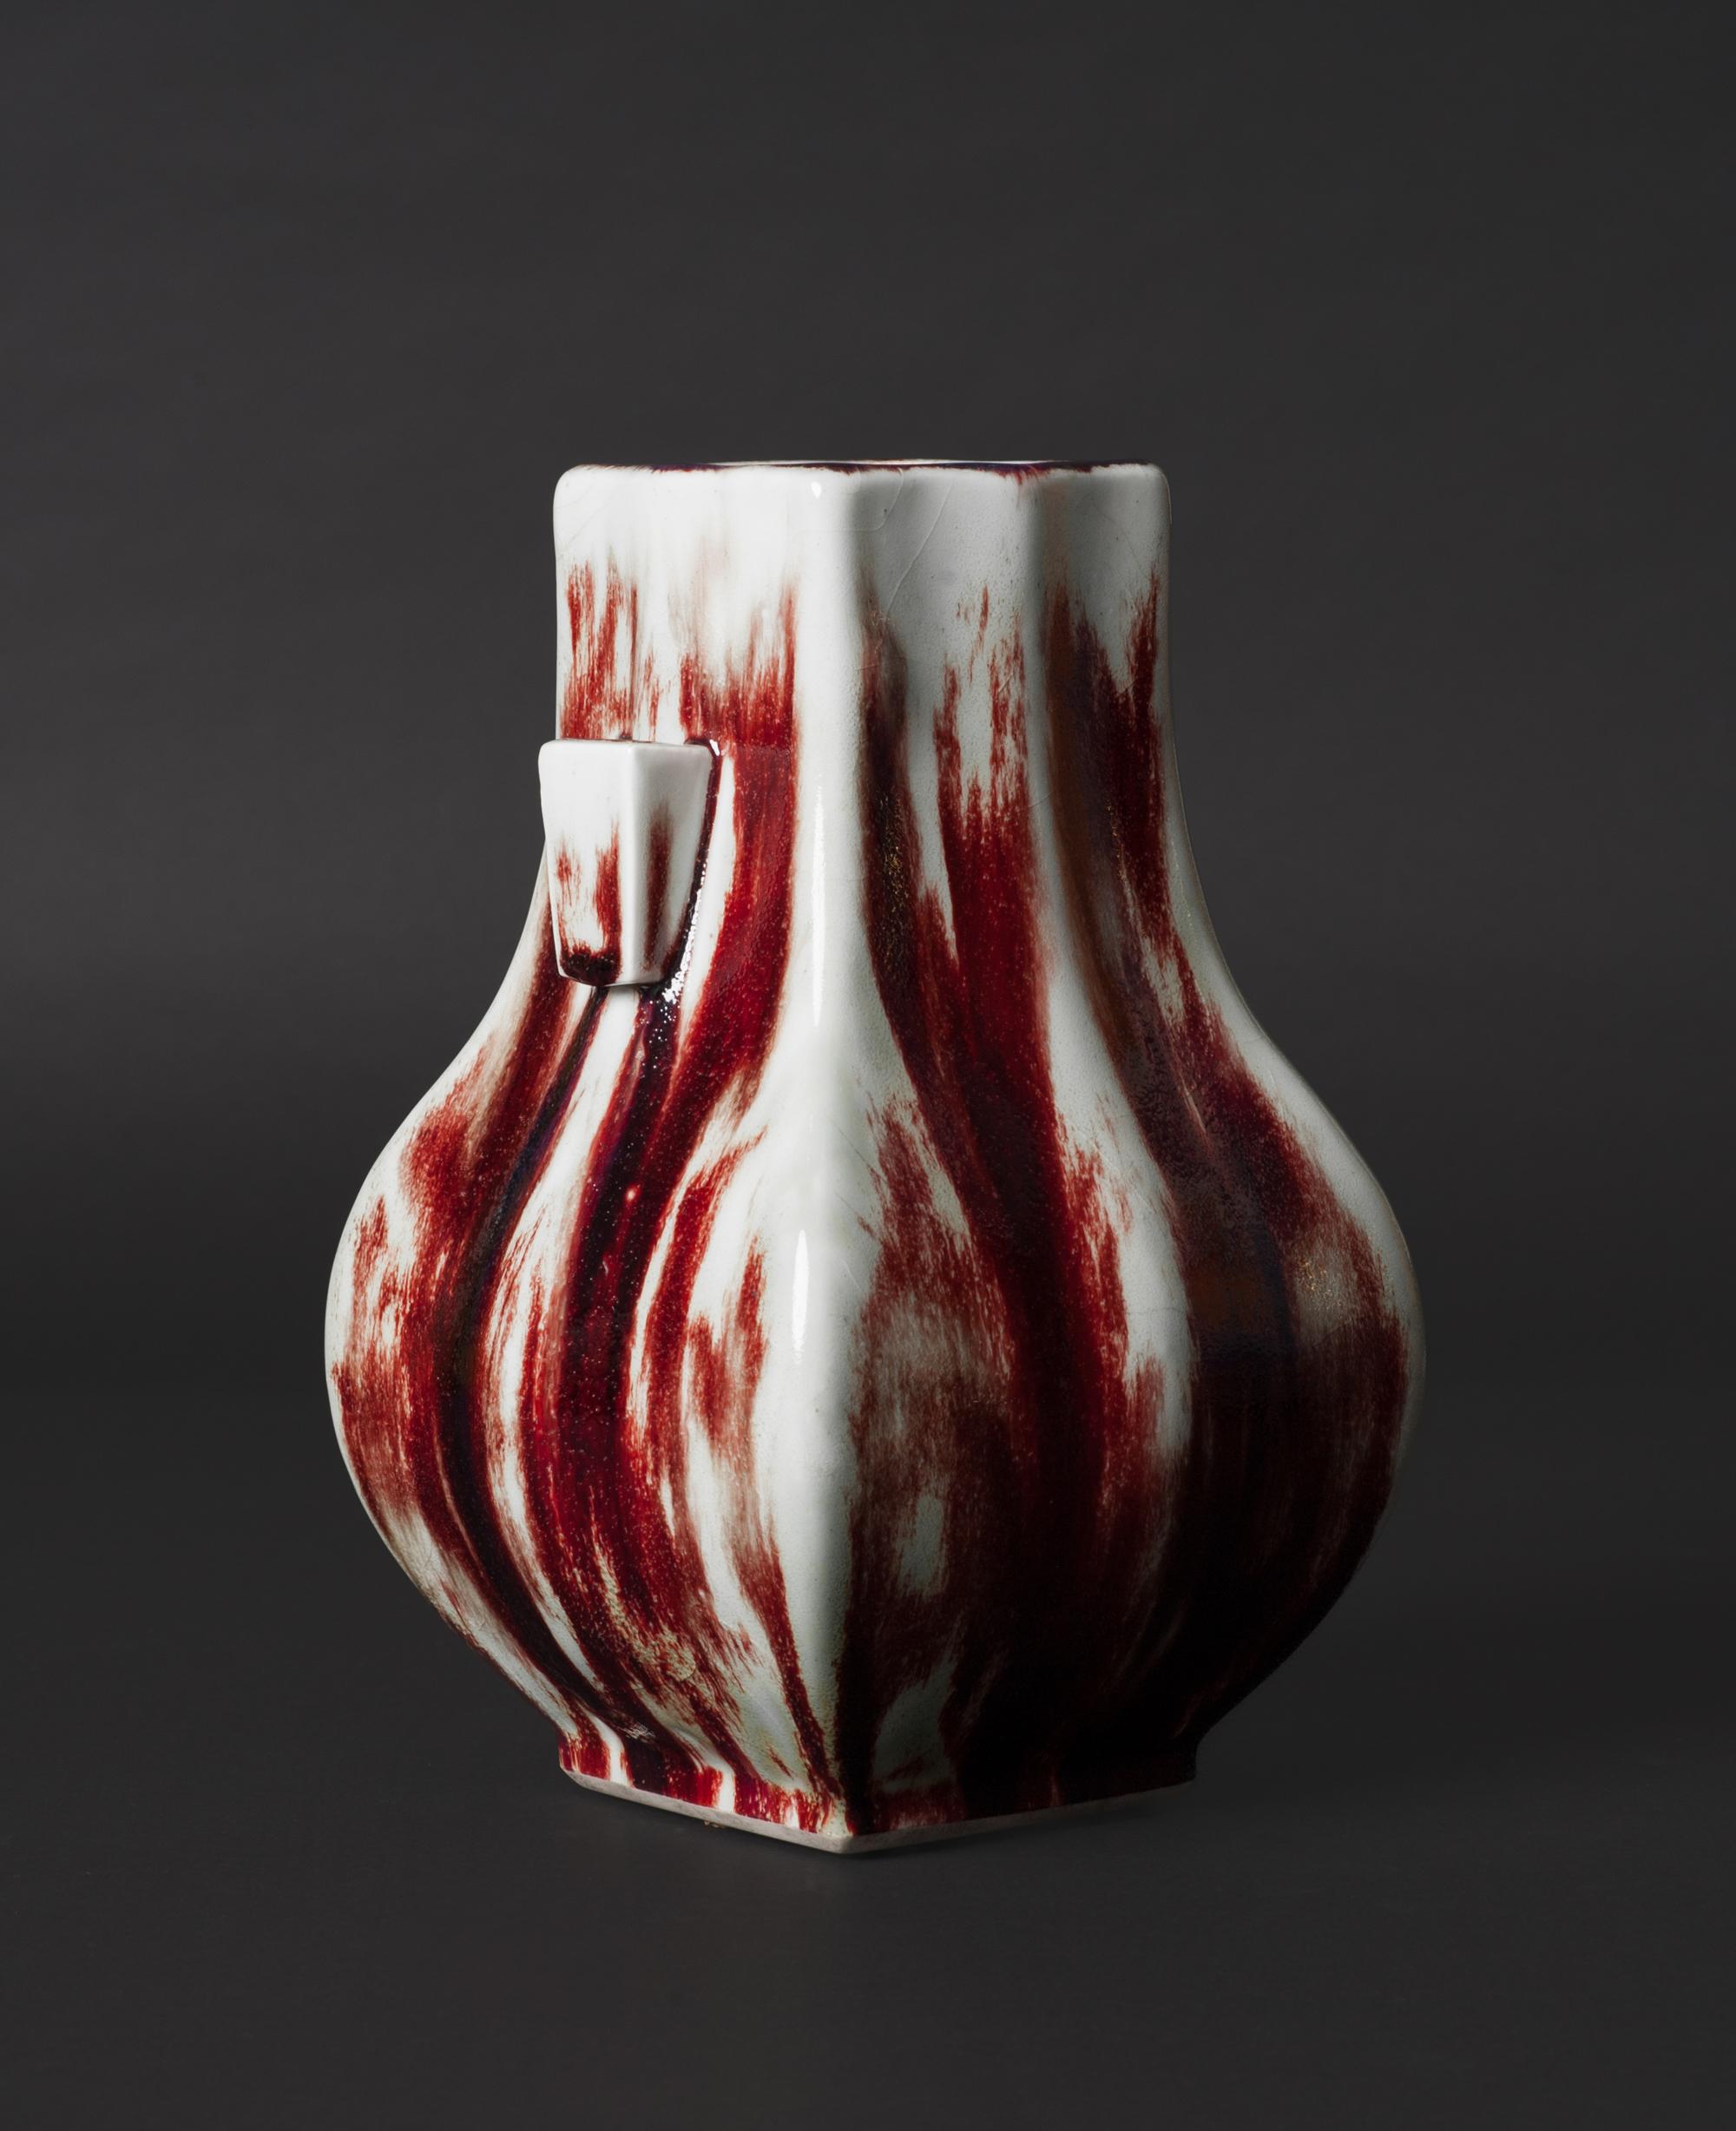 Coming from an artist who guarded his notebooks like trade secrets and purportedly destroyed them before his death in 1907, owning a vase from Chaplet’s experimental period is like possessing a page from one of those coveted, top secret notebooks.